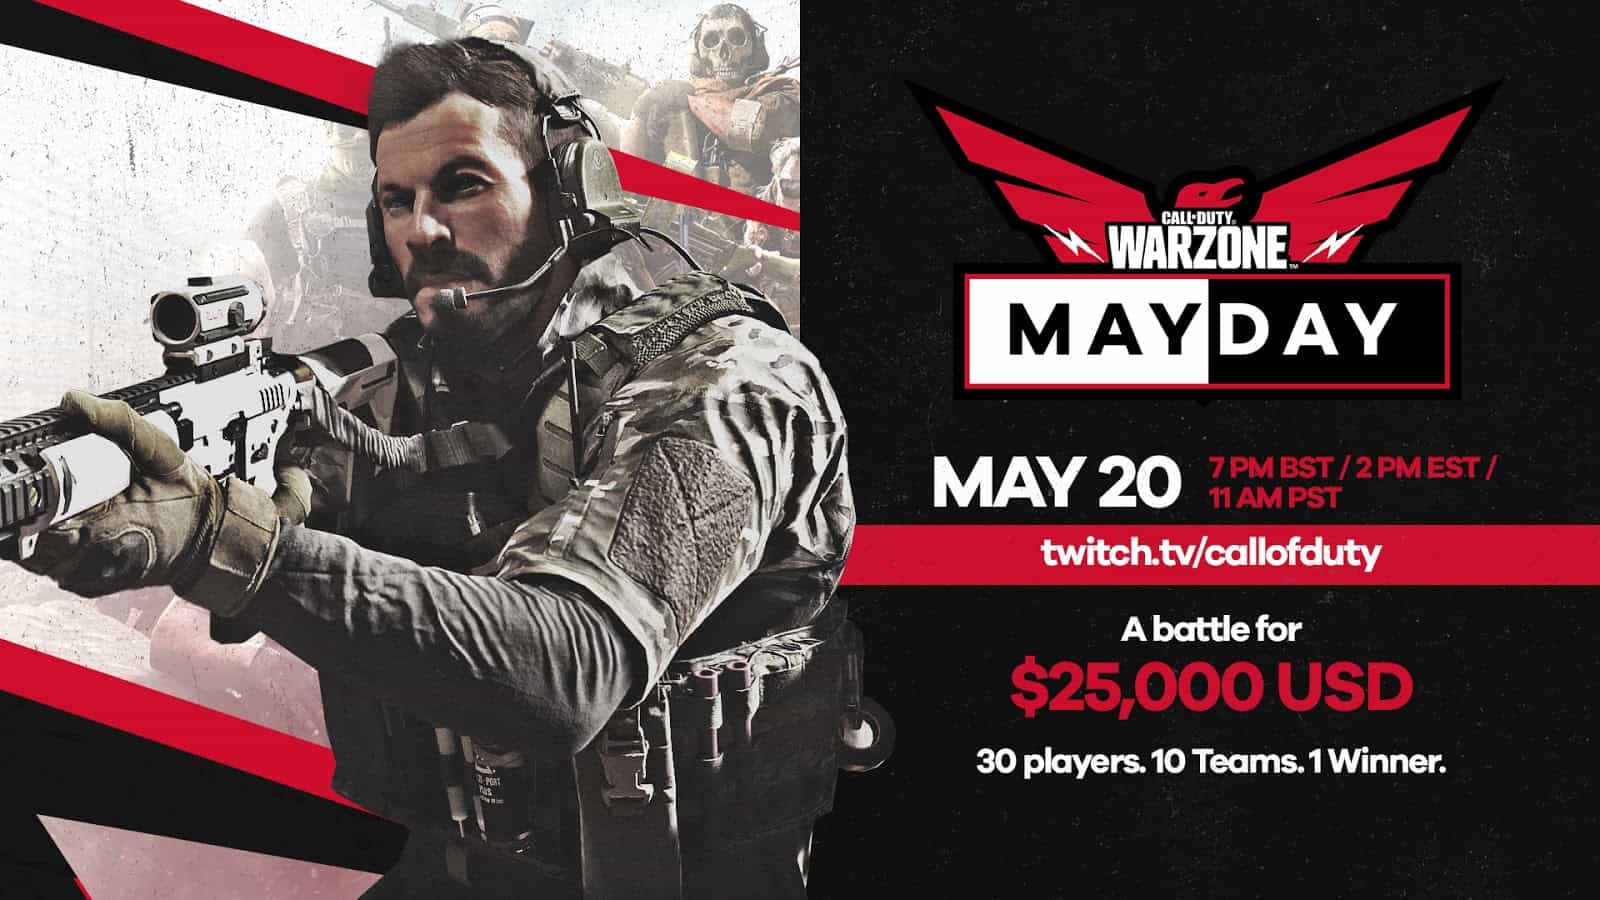 CoD: How to Watch London Royal Ravens’ $25K MayDay Warzone Tournament